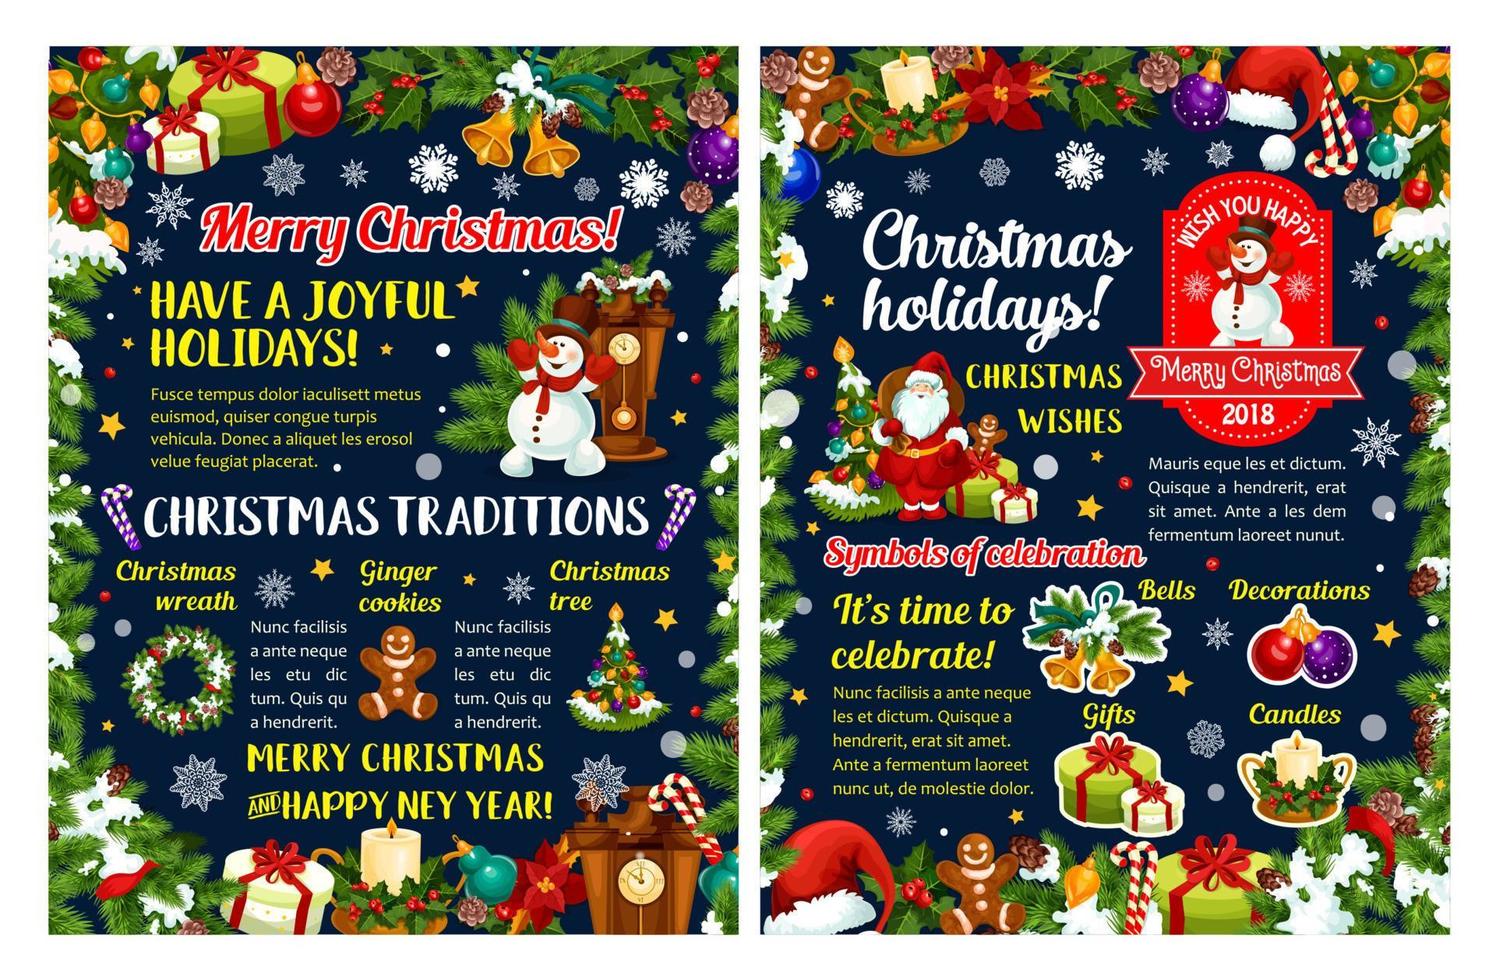 Merry Christmas winter holidays greeting poster vector